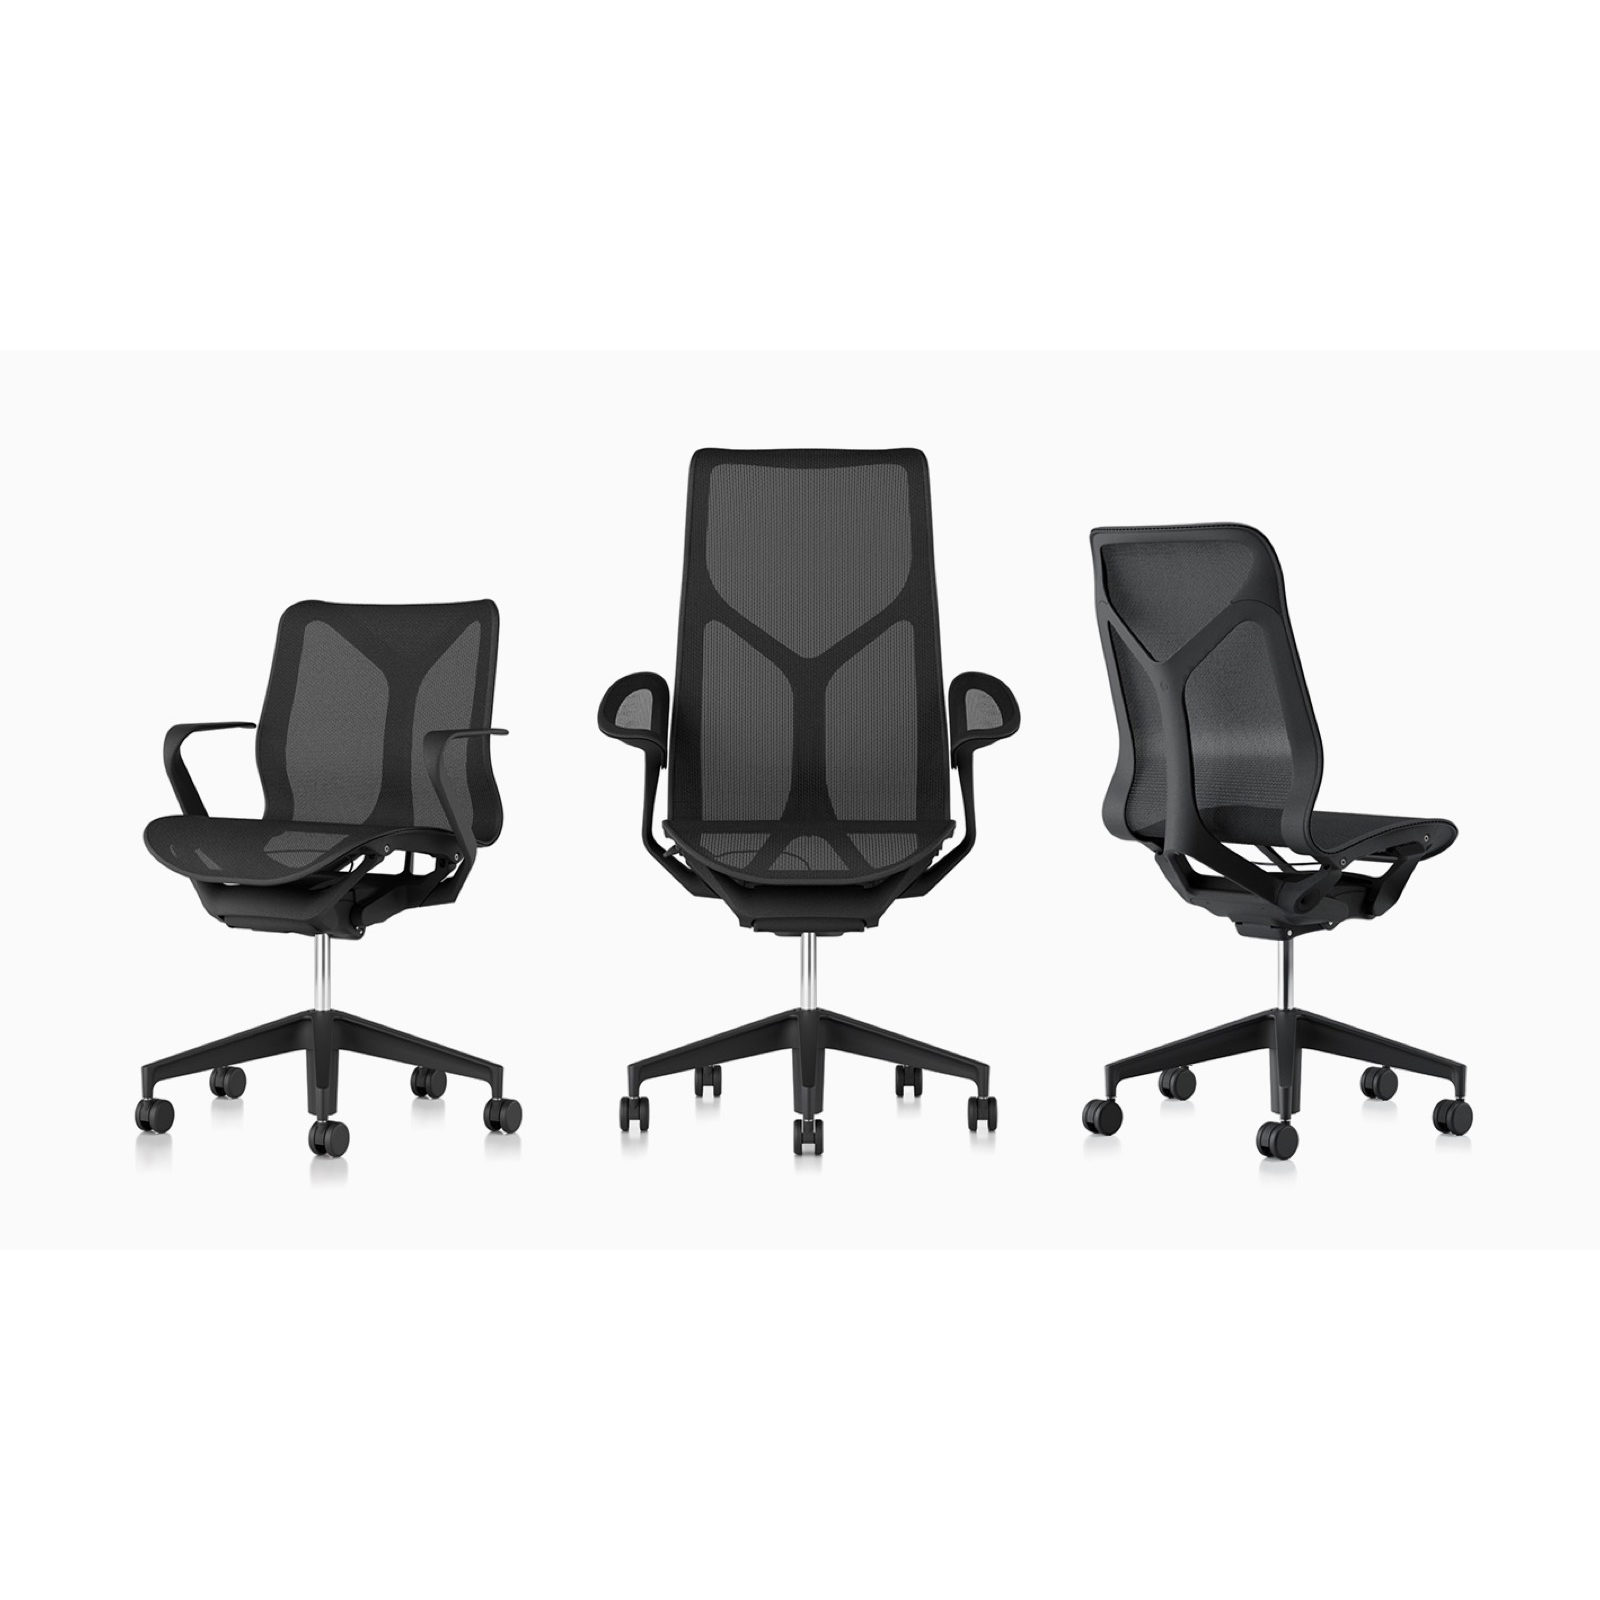 Cosm chairs graphite